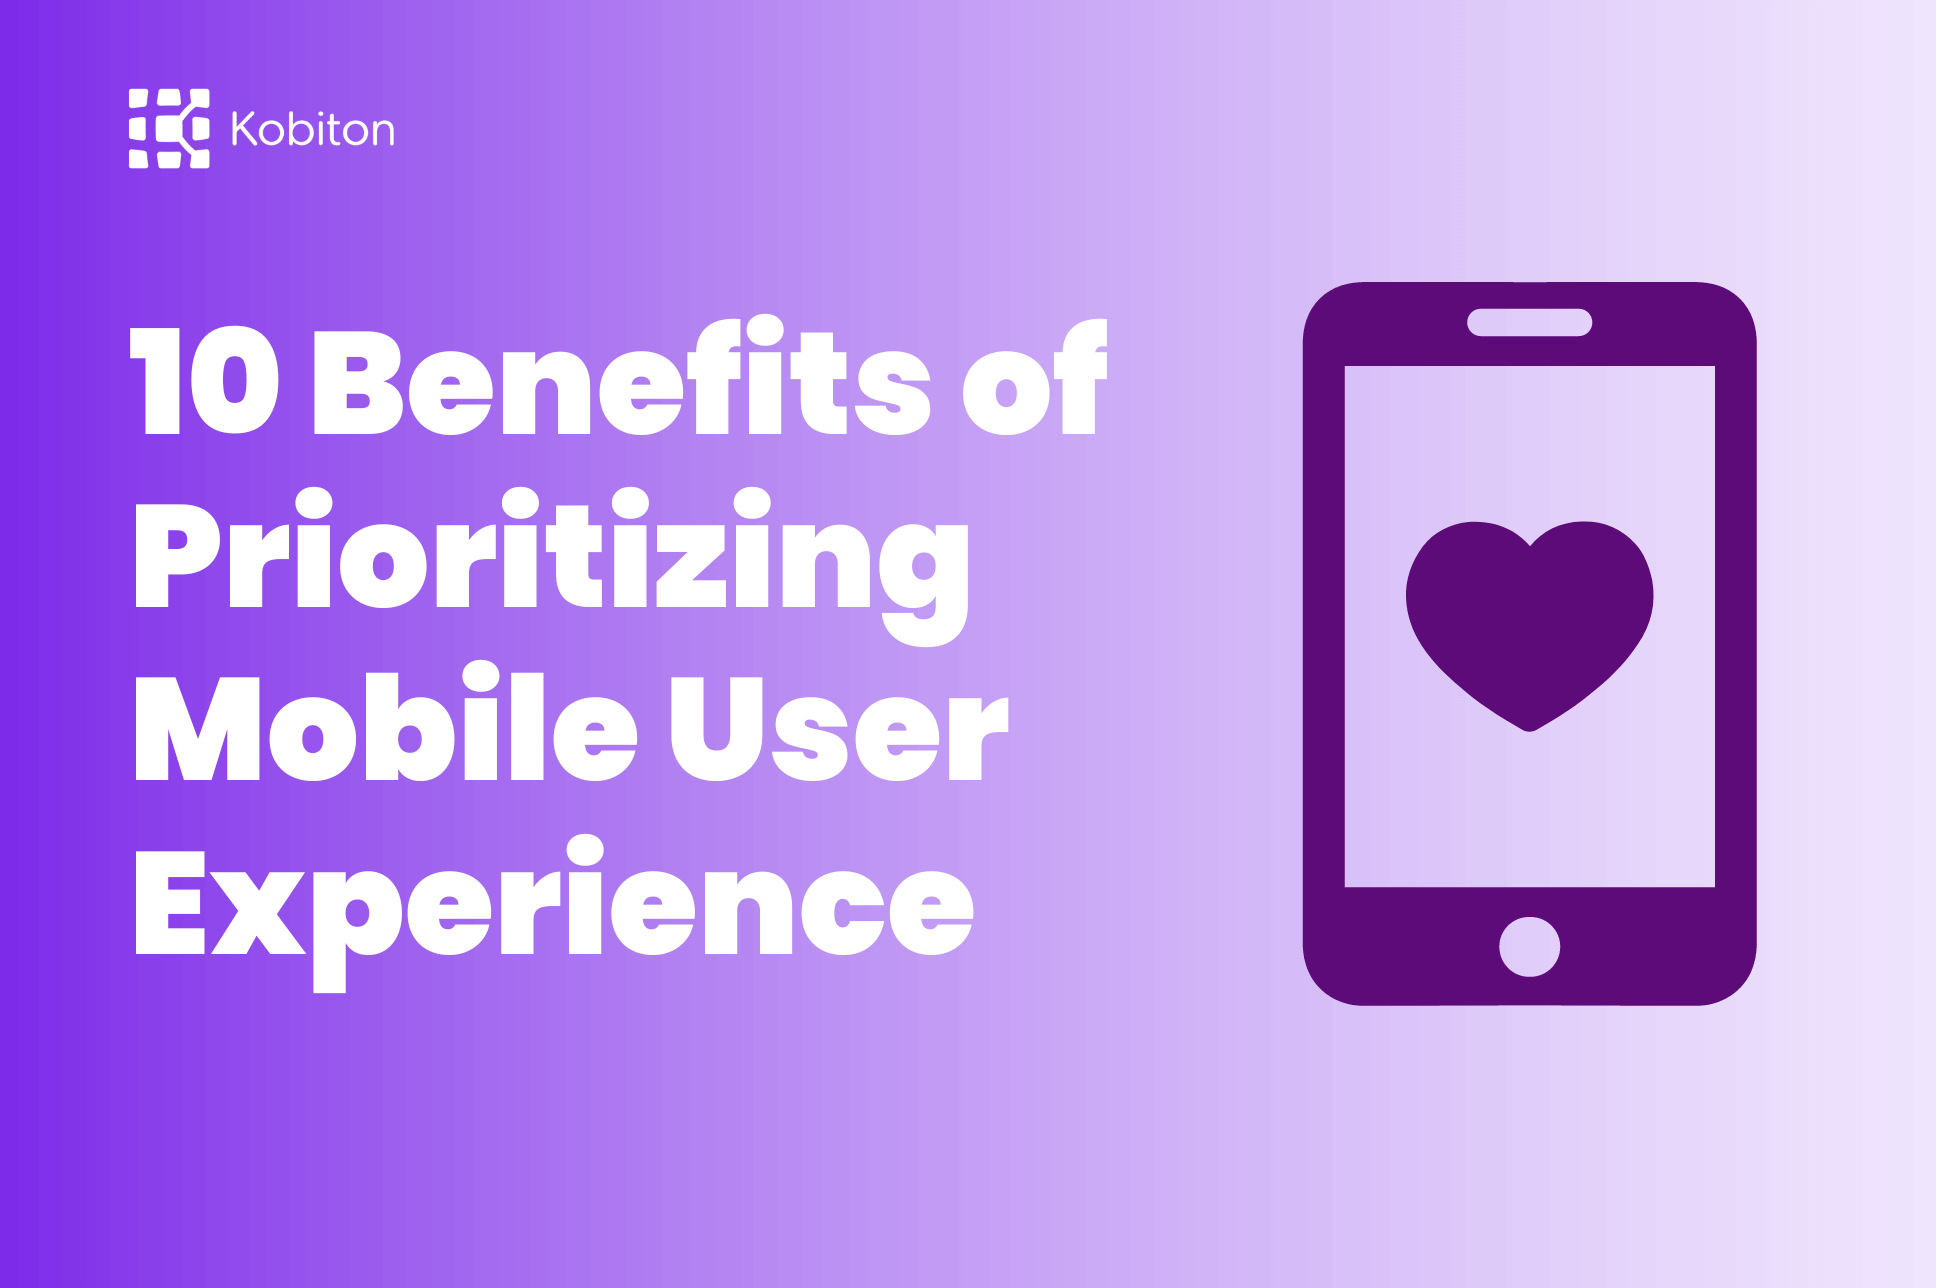 10 benefits of Prioritizing Mobile User Experience